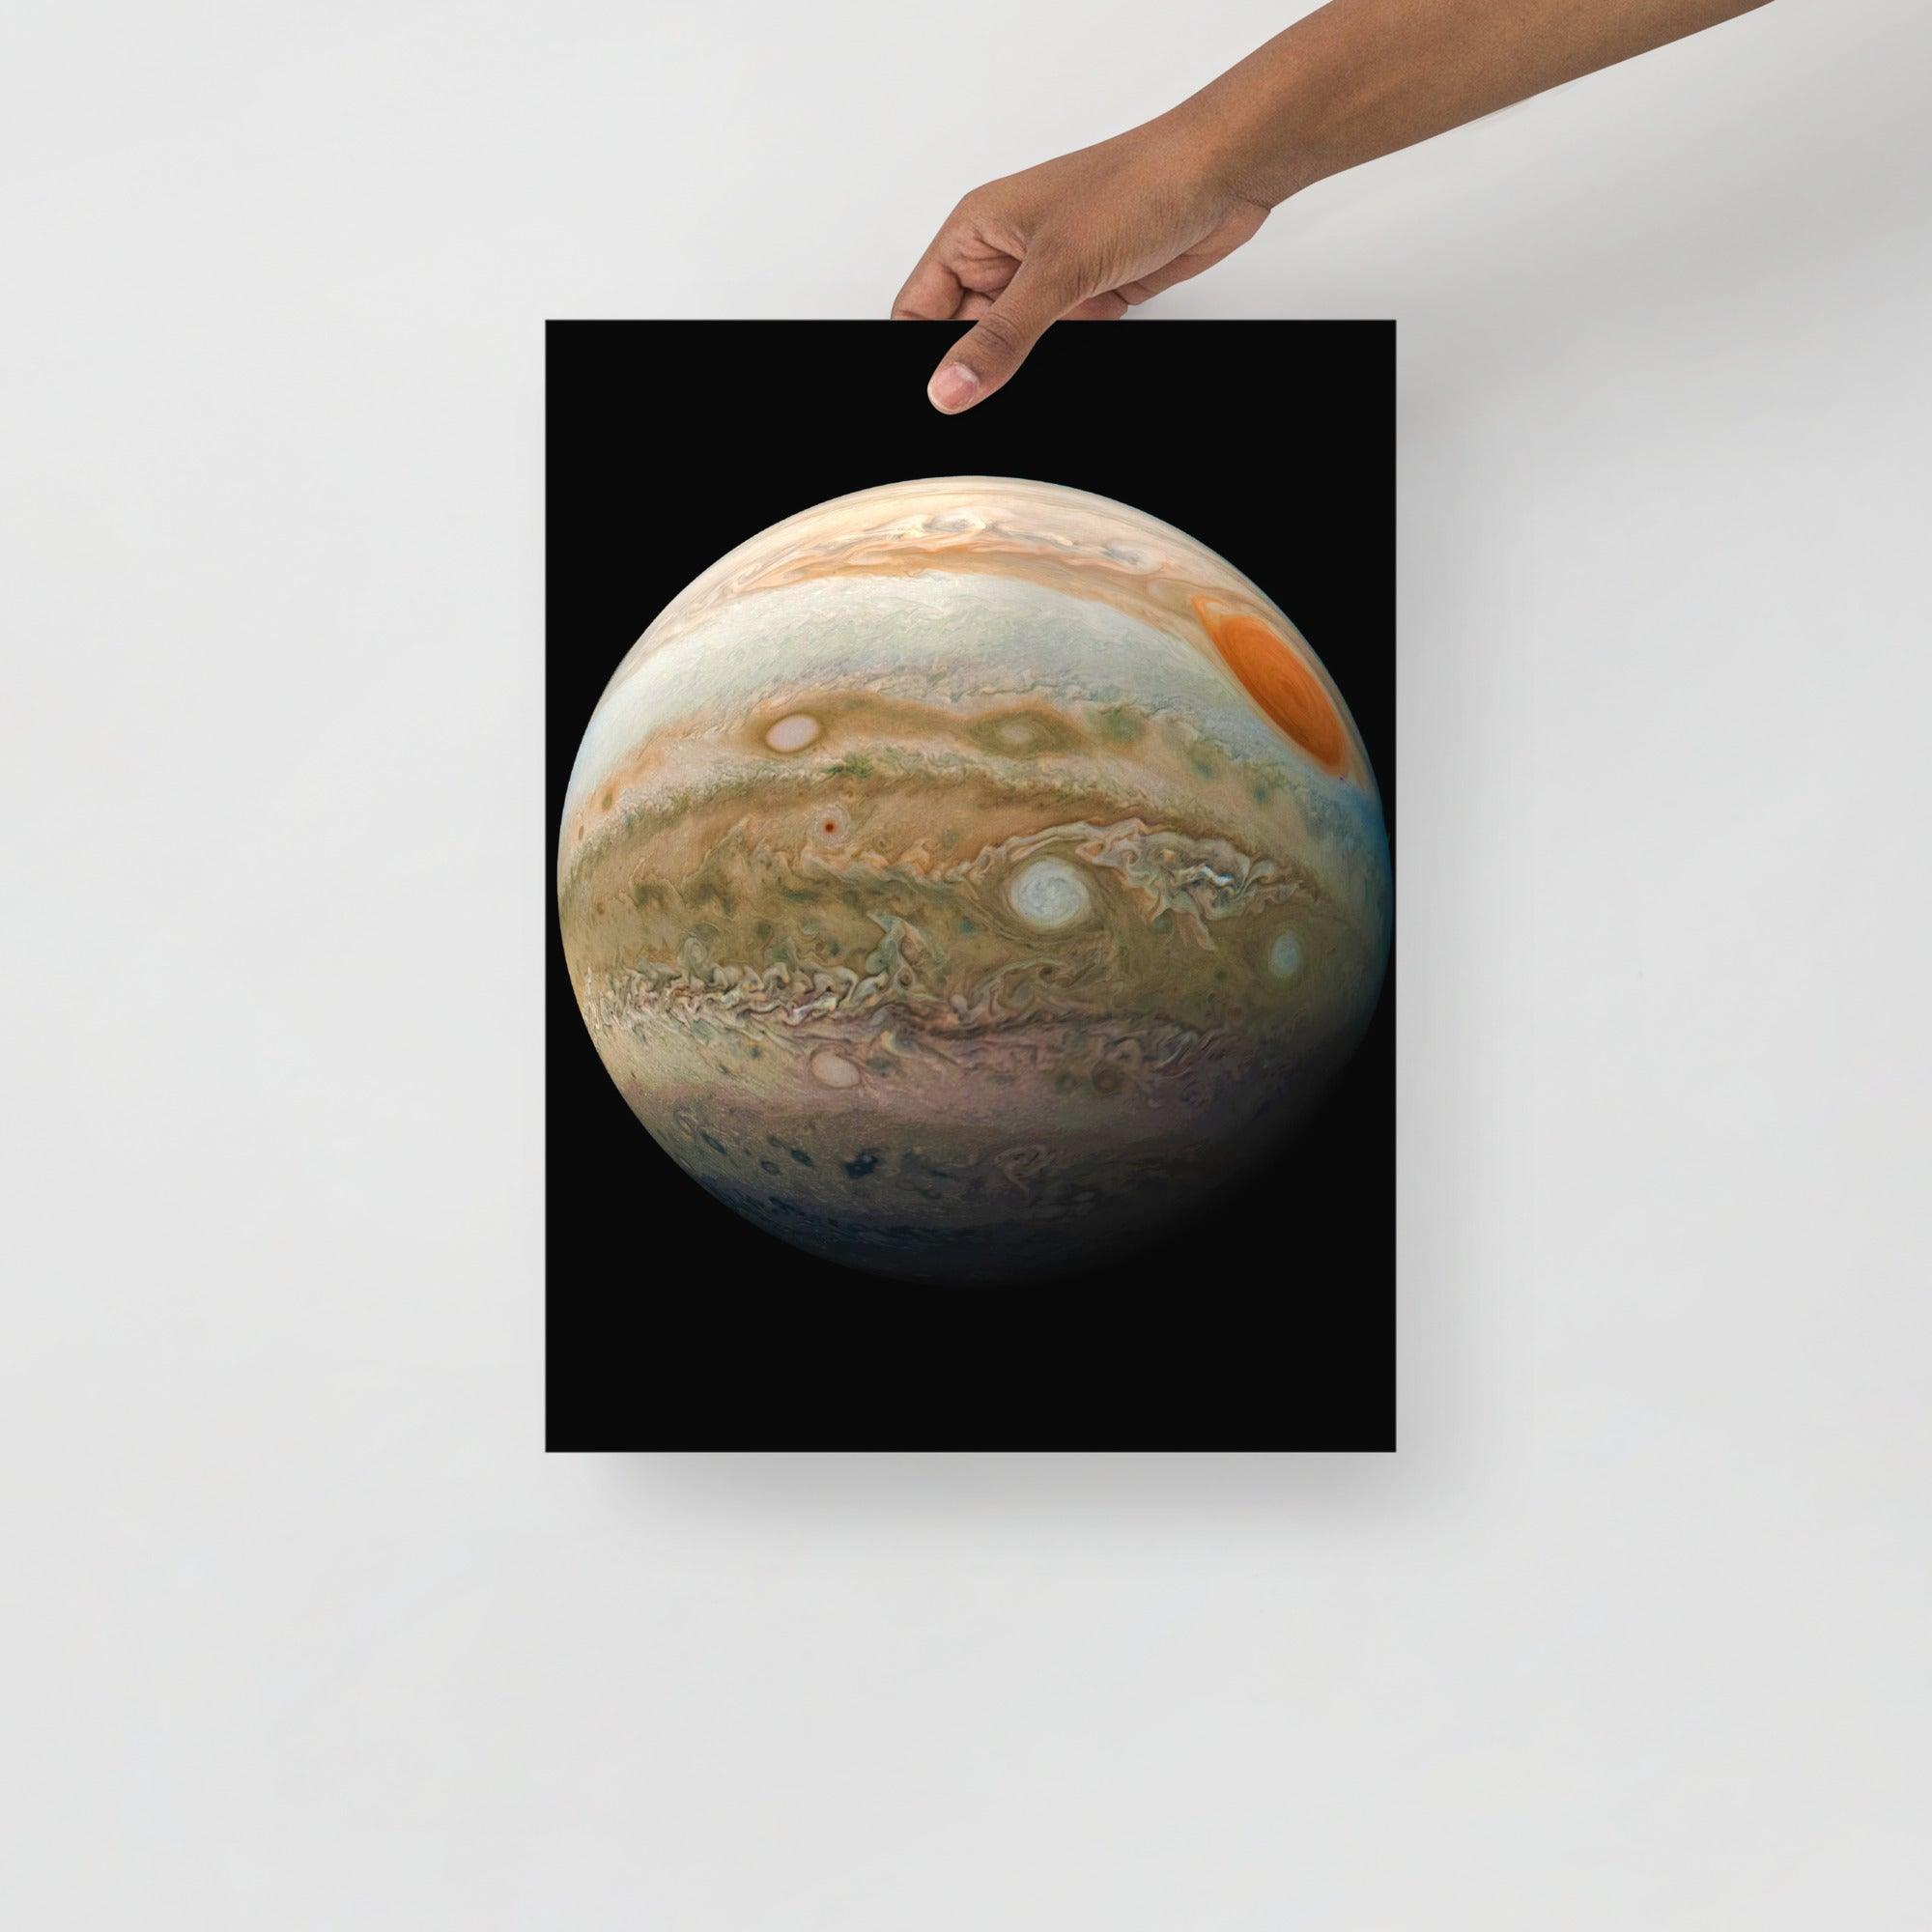 A Planet Jupiter From the Juno Spacecraft poster on a plain backdrop in size 12x16”.